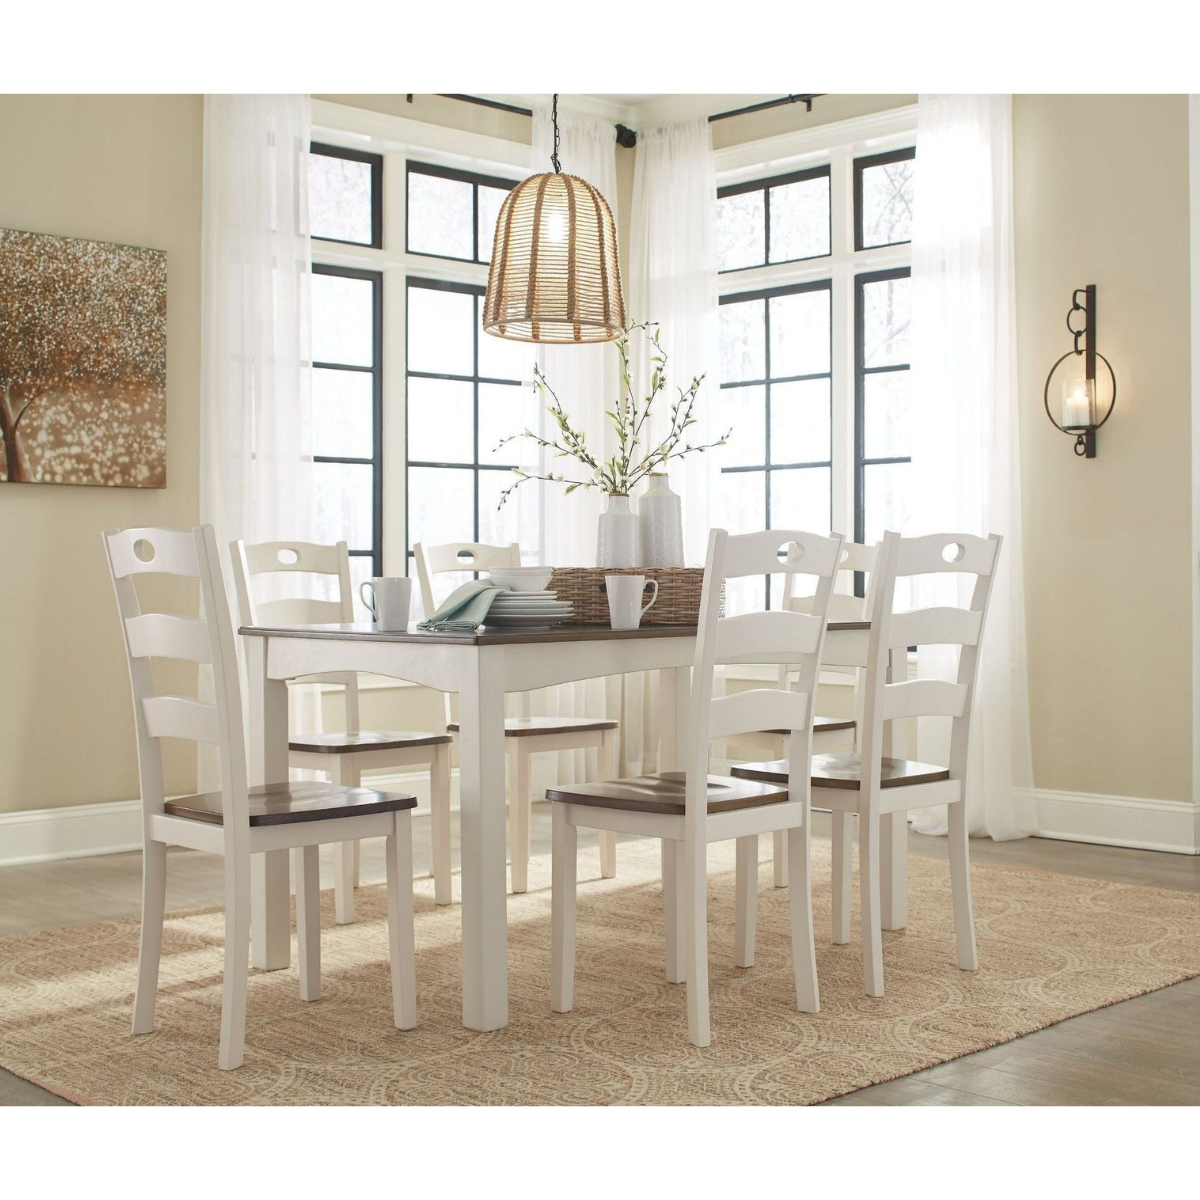 Ashley Woodanville Dining Height Dining Set D335-425 $919.00 90 Days Same as Cash*